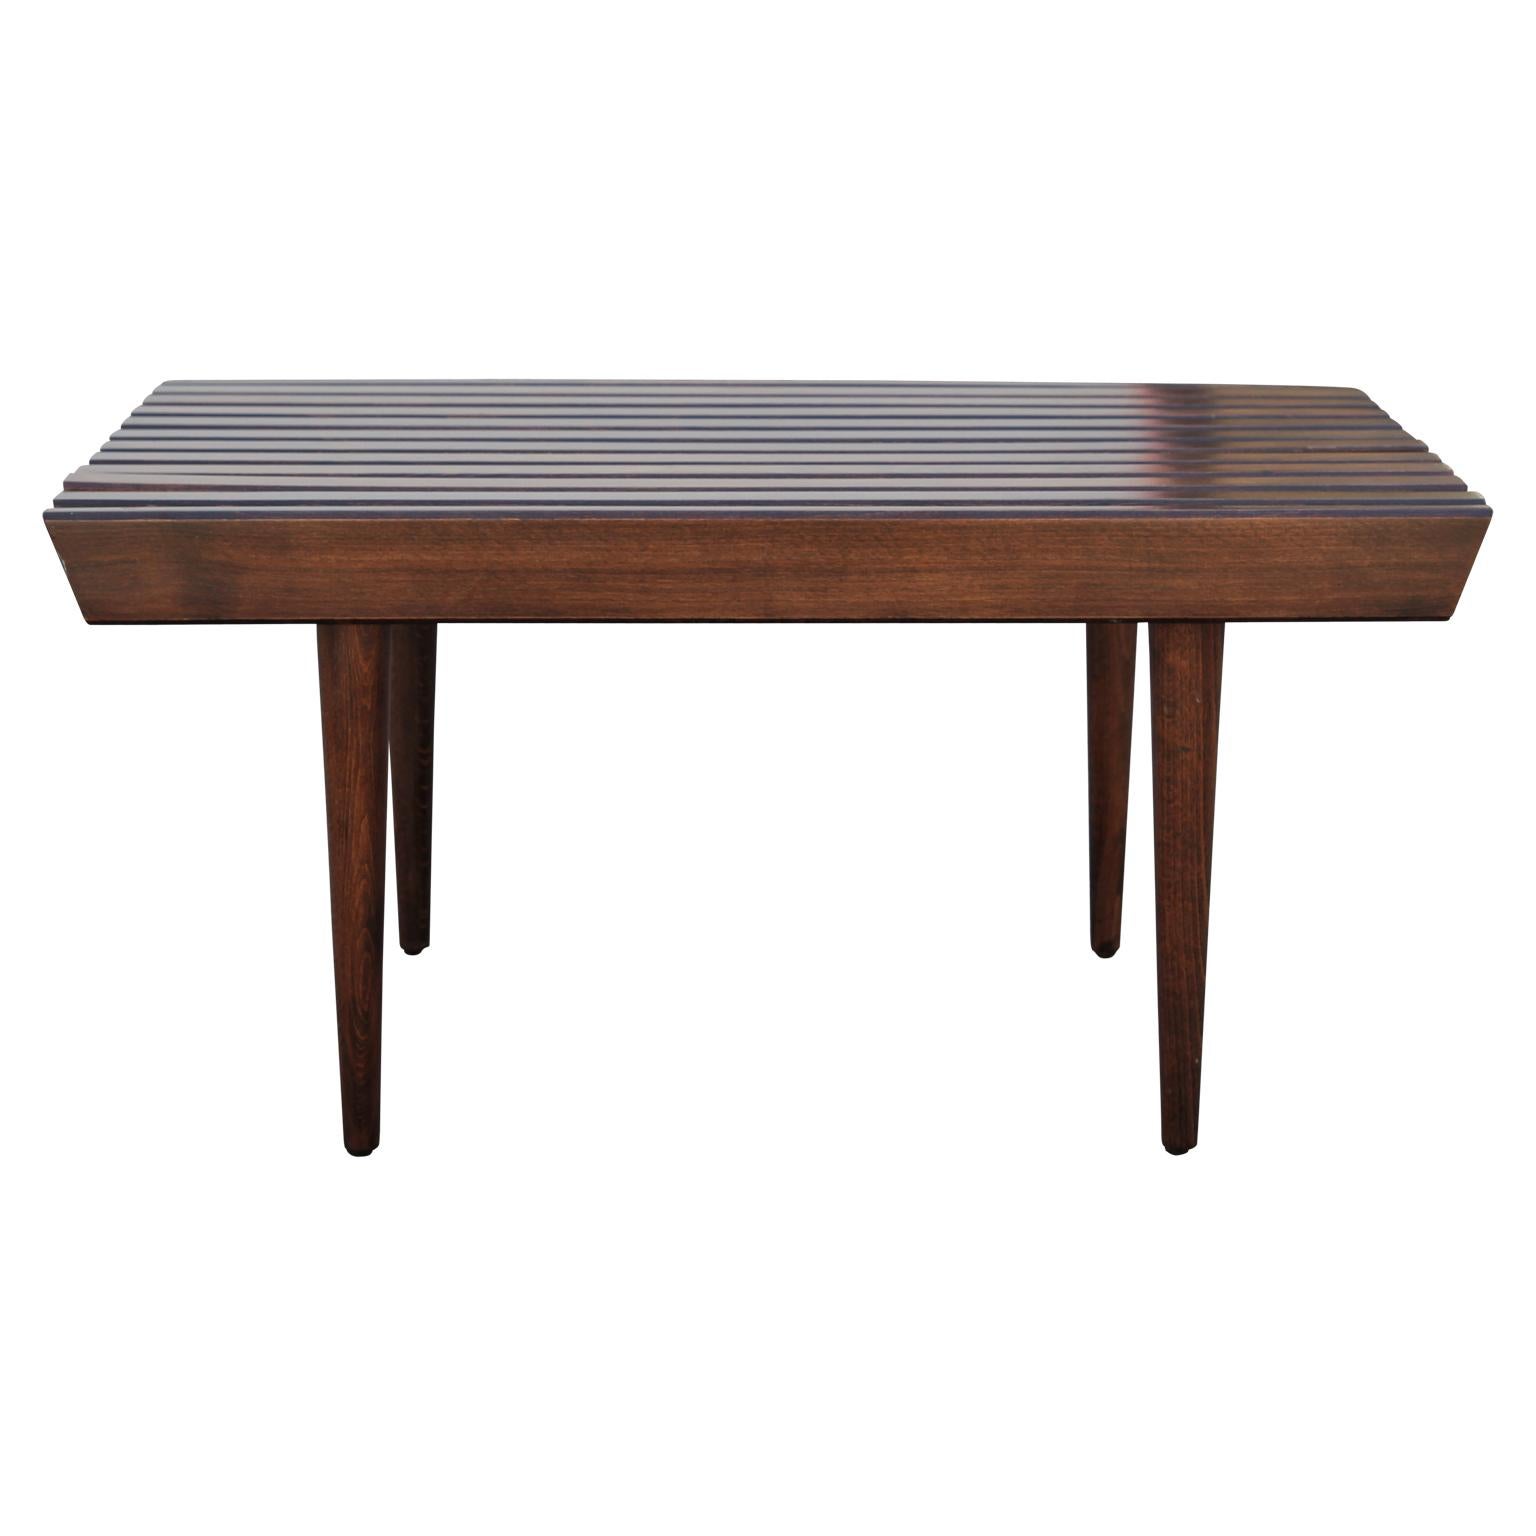 Very sharp wooden slat bench in the style of George Nelson. 
The iconic benches are functional as a coffee table or a side table.